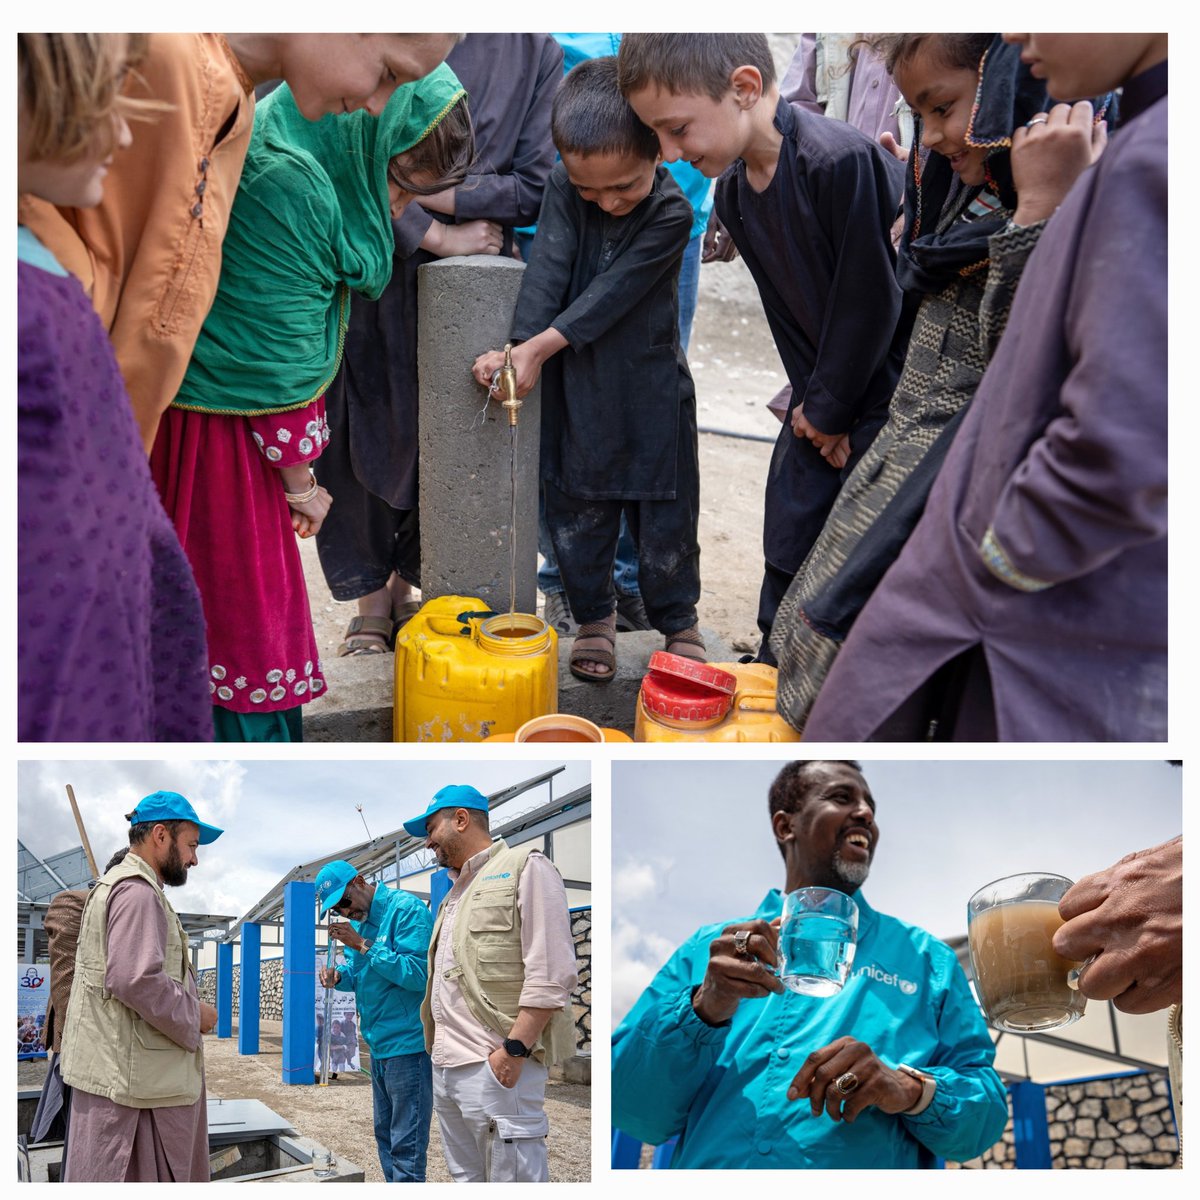 Clean water is crucial for child survival. Thanks to flexible Global Thematic Funding, @UNICEFAfg can bring eco-friendly water facilities to communities like Sorobi in central Afghanistan, where a new water treatment plant is giving 9,000 people (4,000 children) safe access.